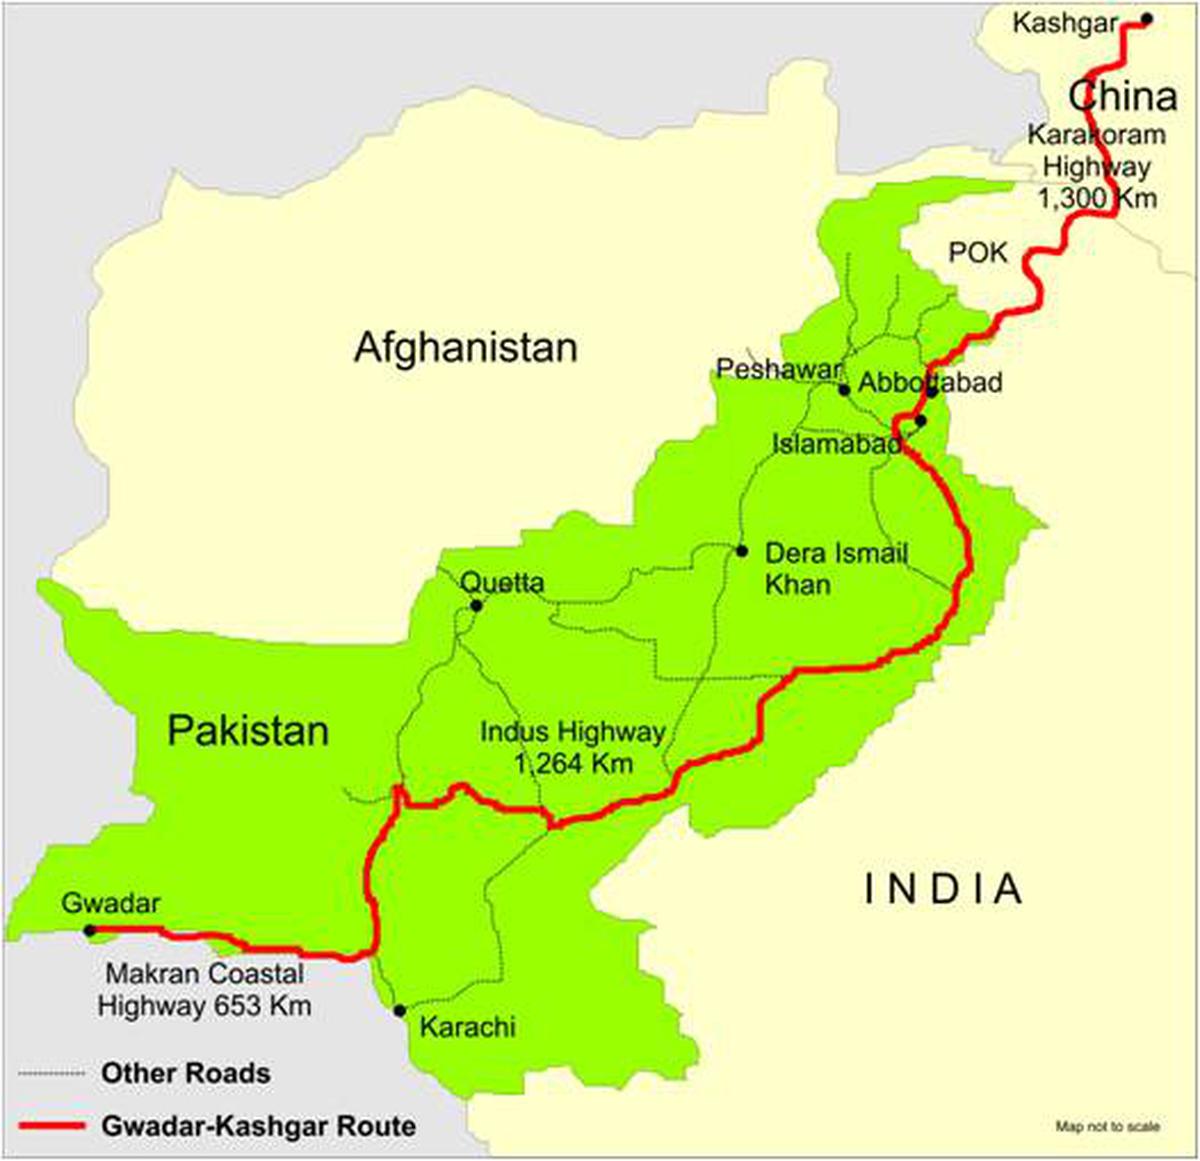 CPEC routes from Pakistan’s Gwadar port in PoK to China’s Kashgar in Xinjiang district